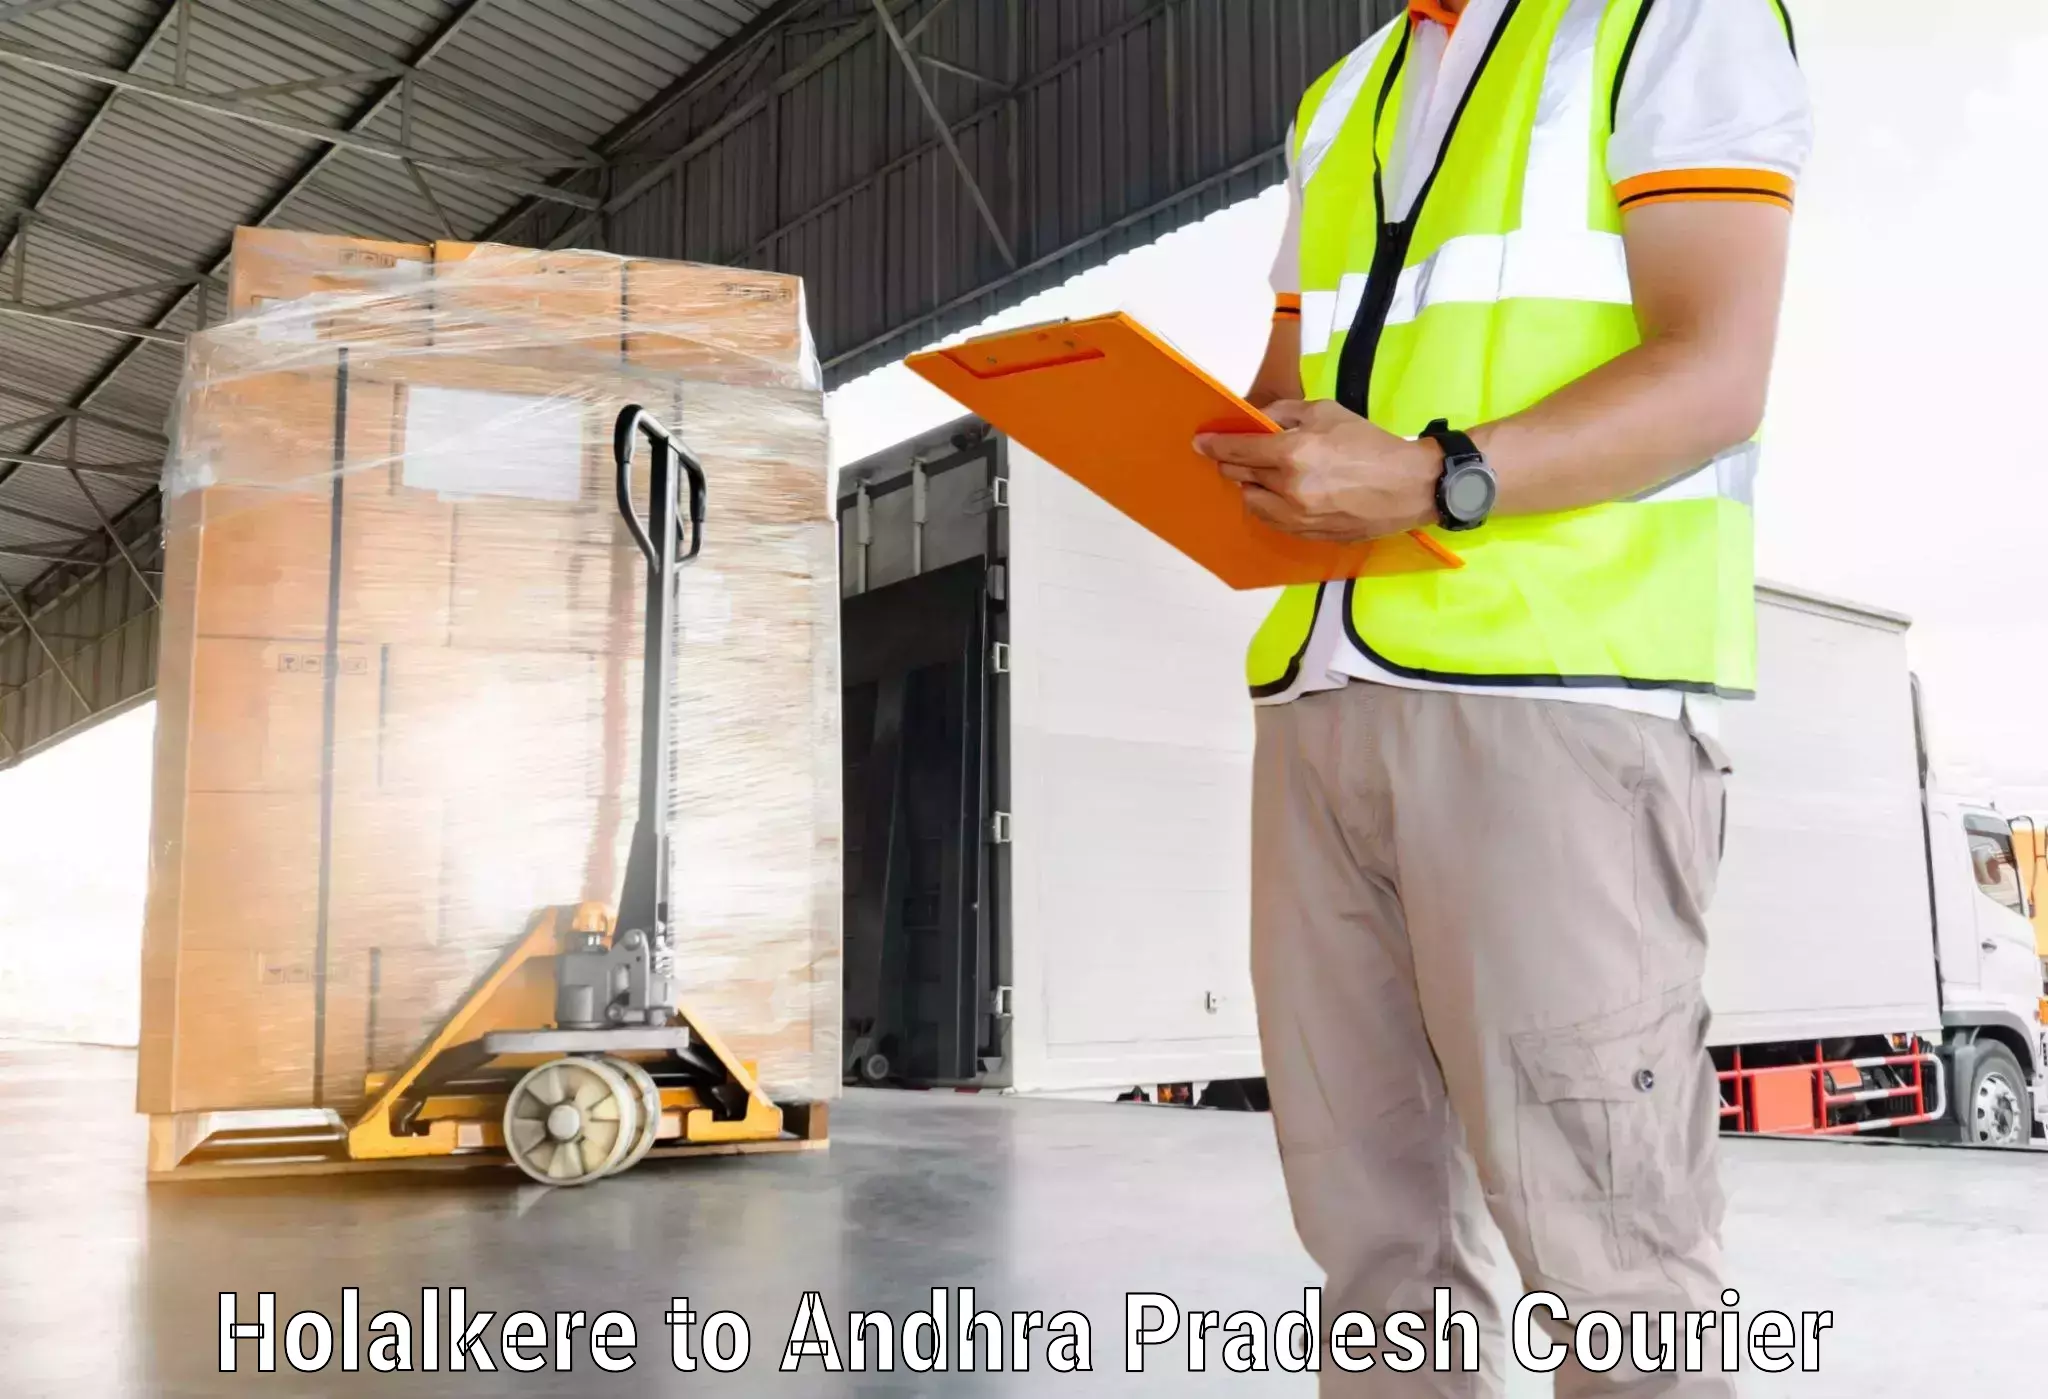 Easy access courier services Holalkere to Lingapalem